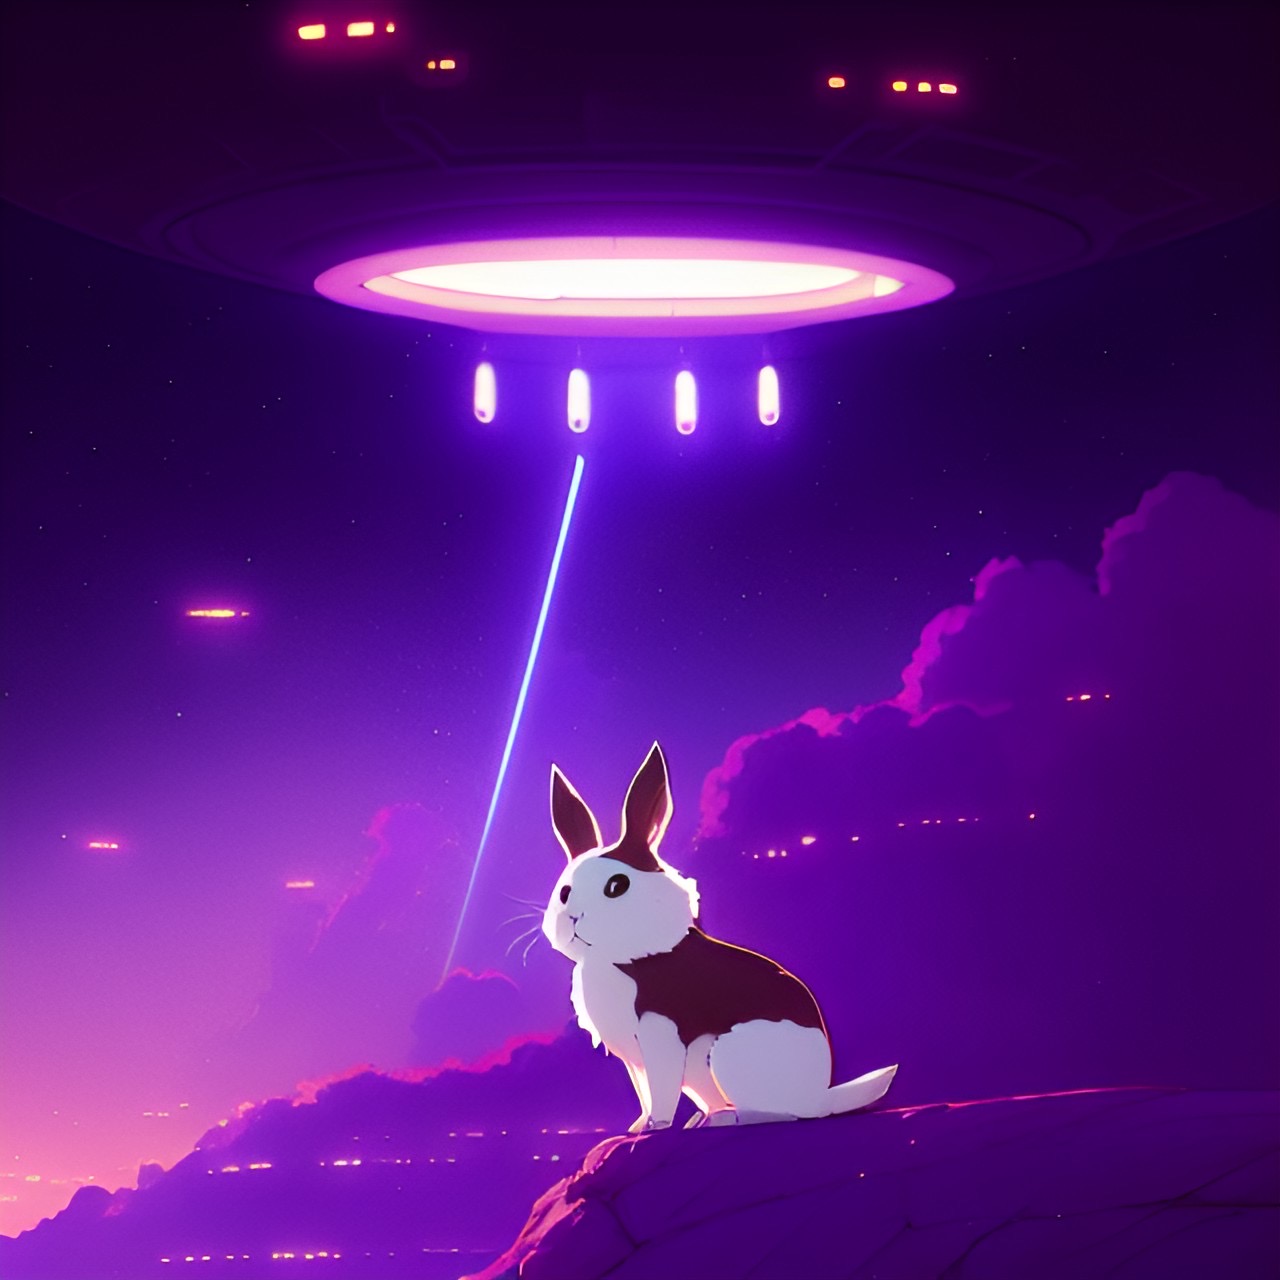 A rabbit with an alien ship above it